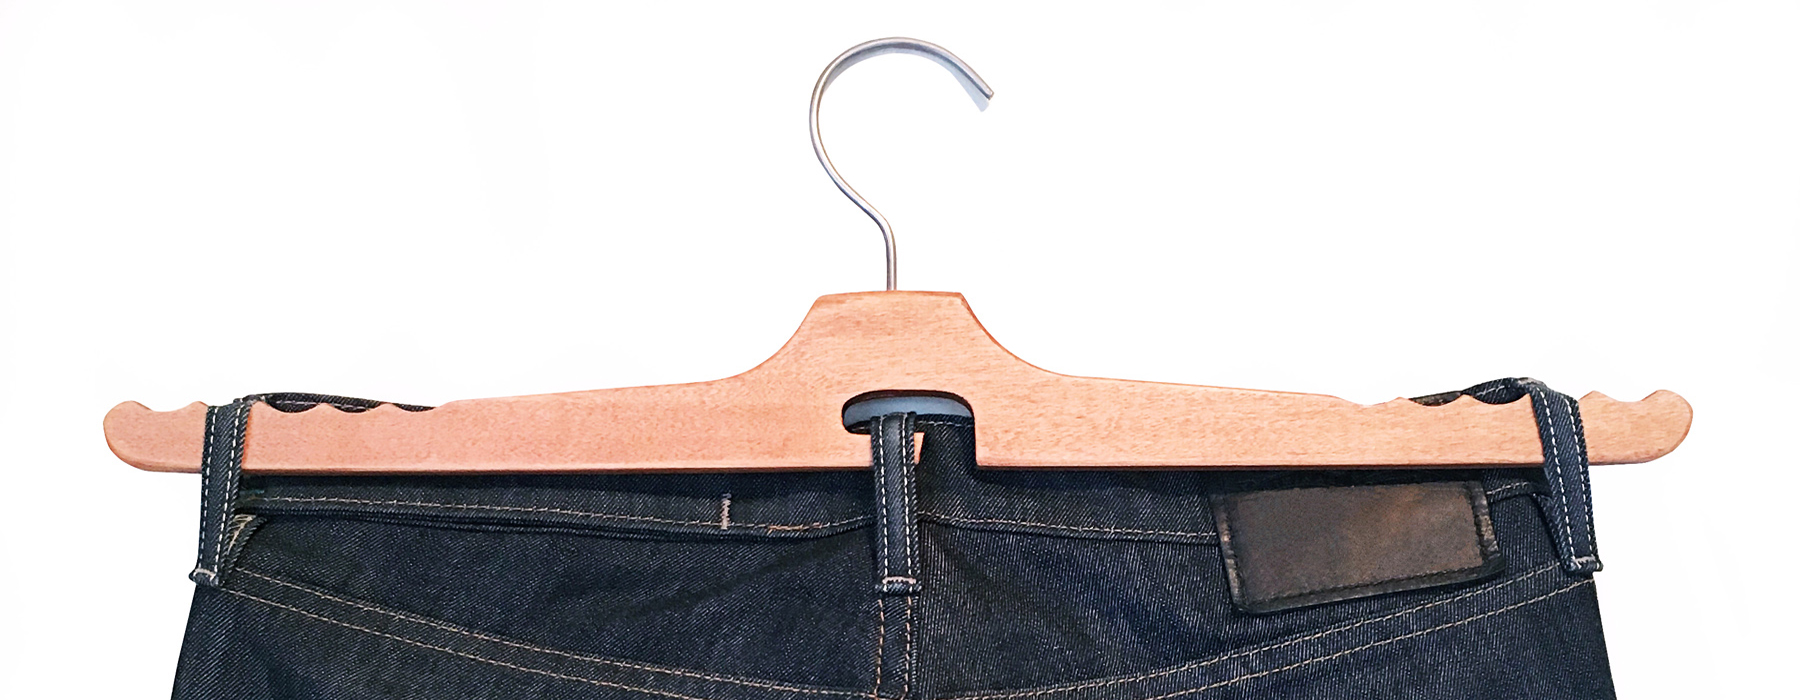 steven sal debus invents jean hanger that takes care of your beloved pants